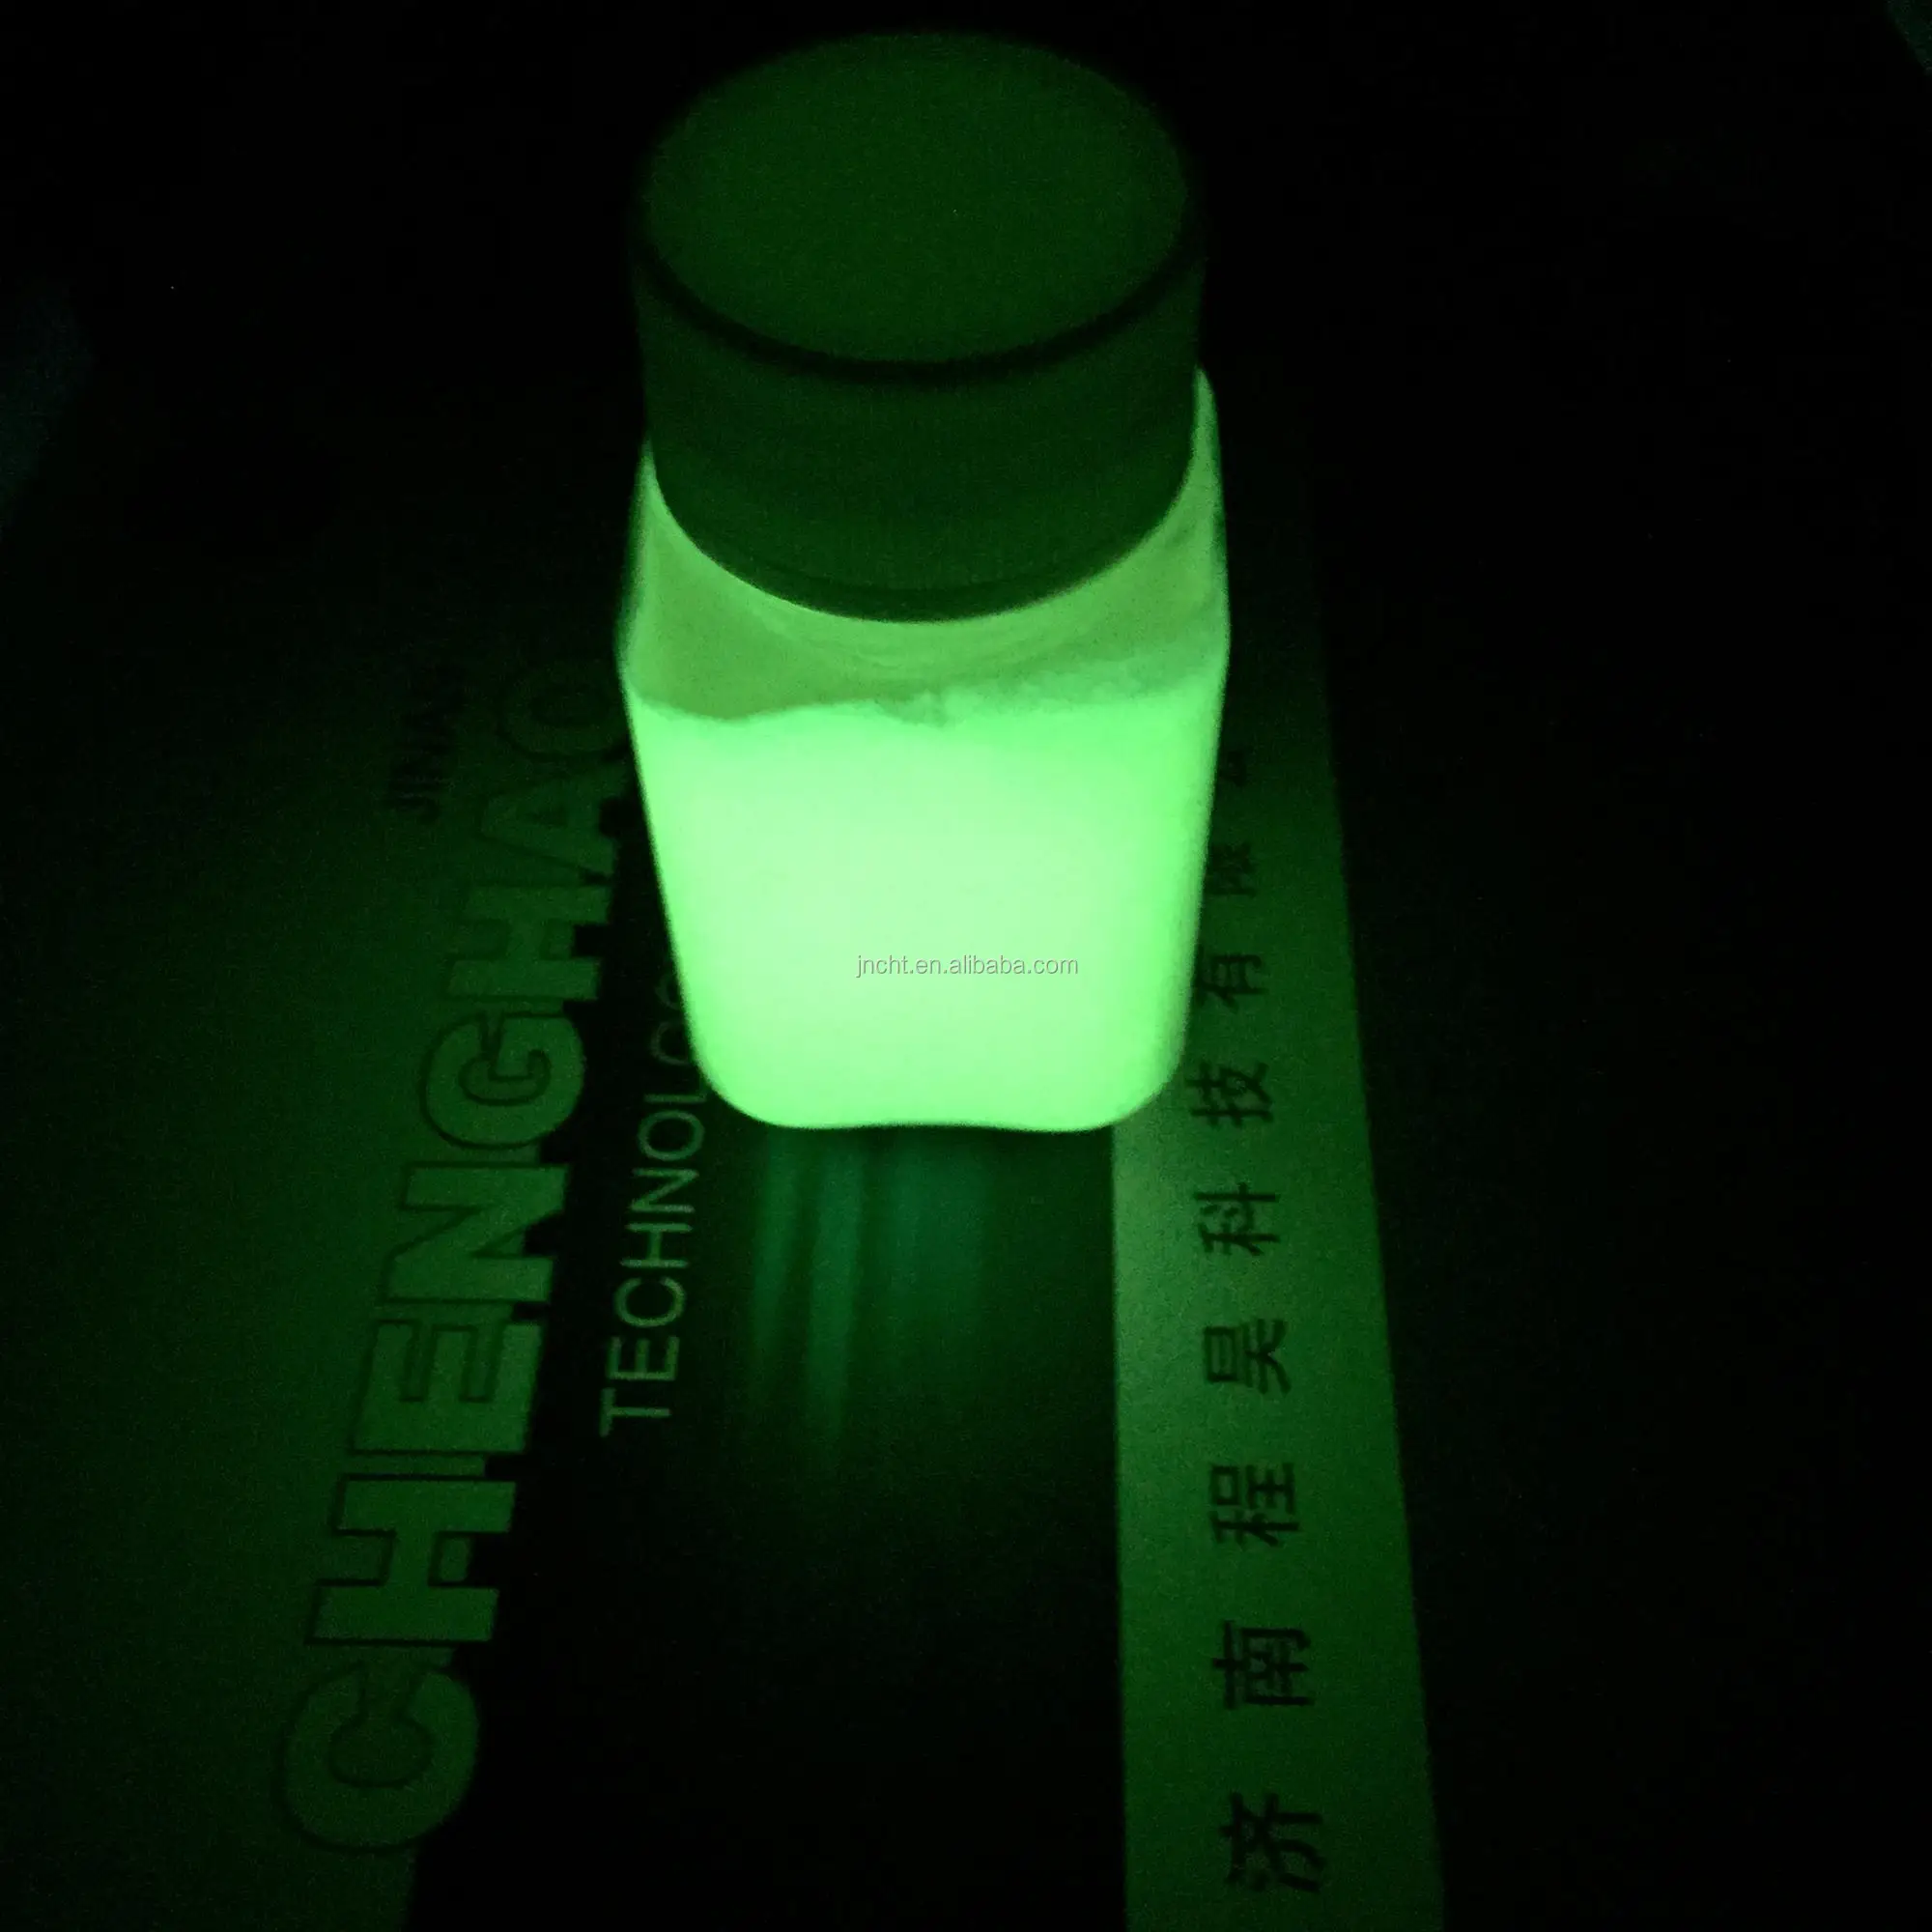 any concerns about luminous paint